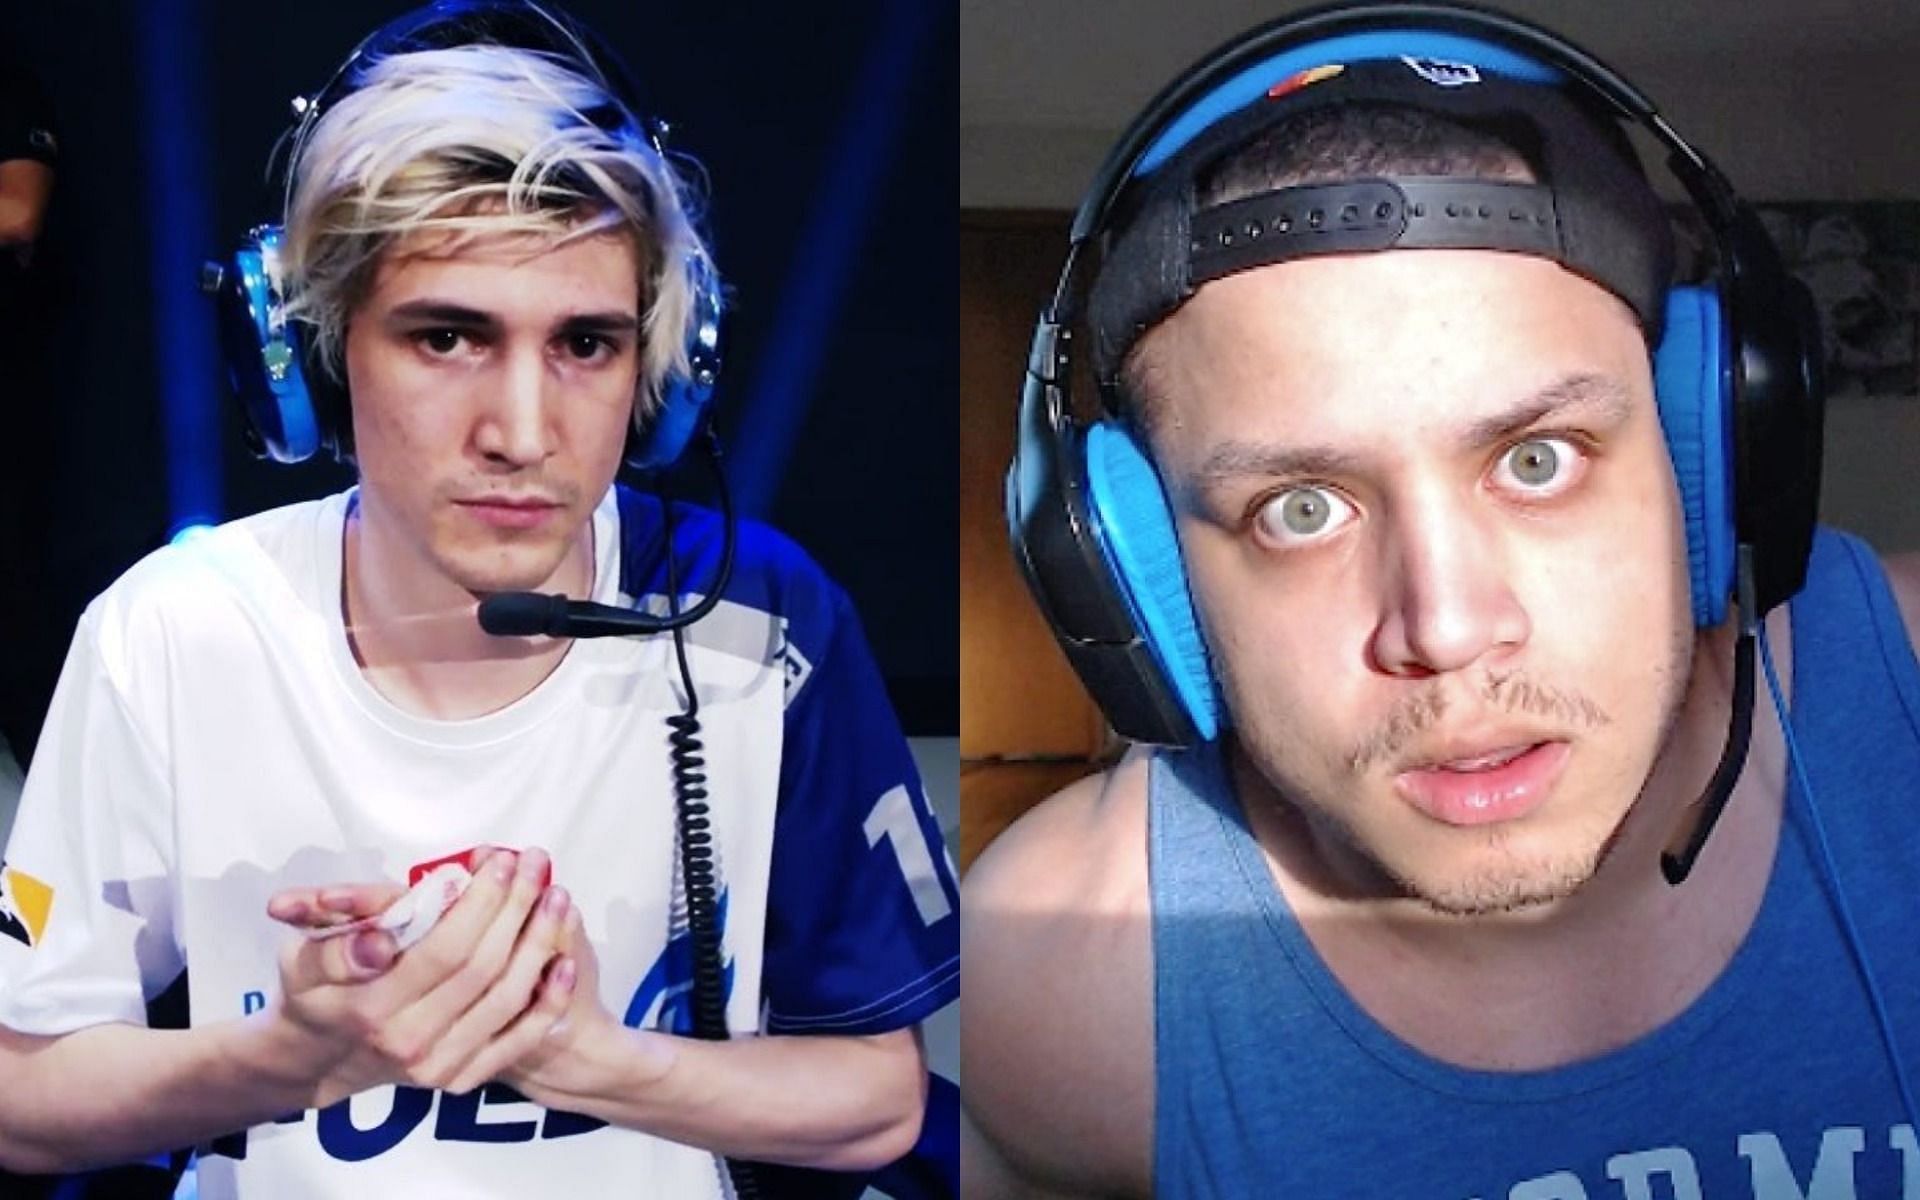 Tyler1 imitates xQc after their hilarious interaction (Images via Twitter)